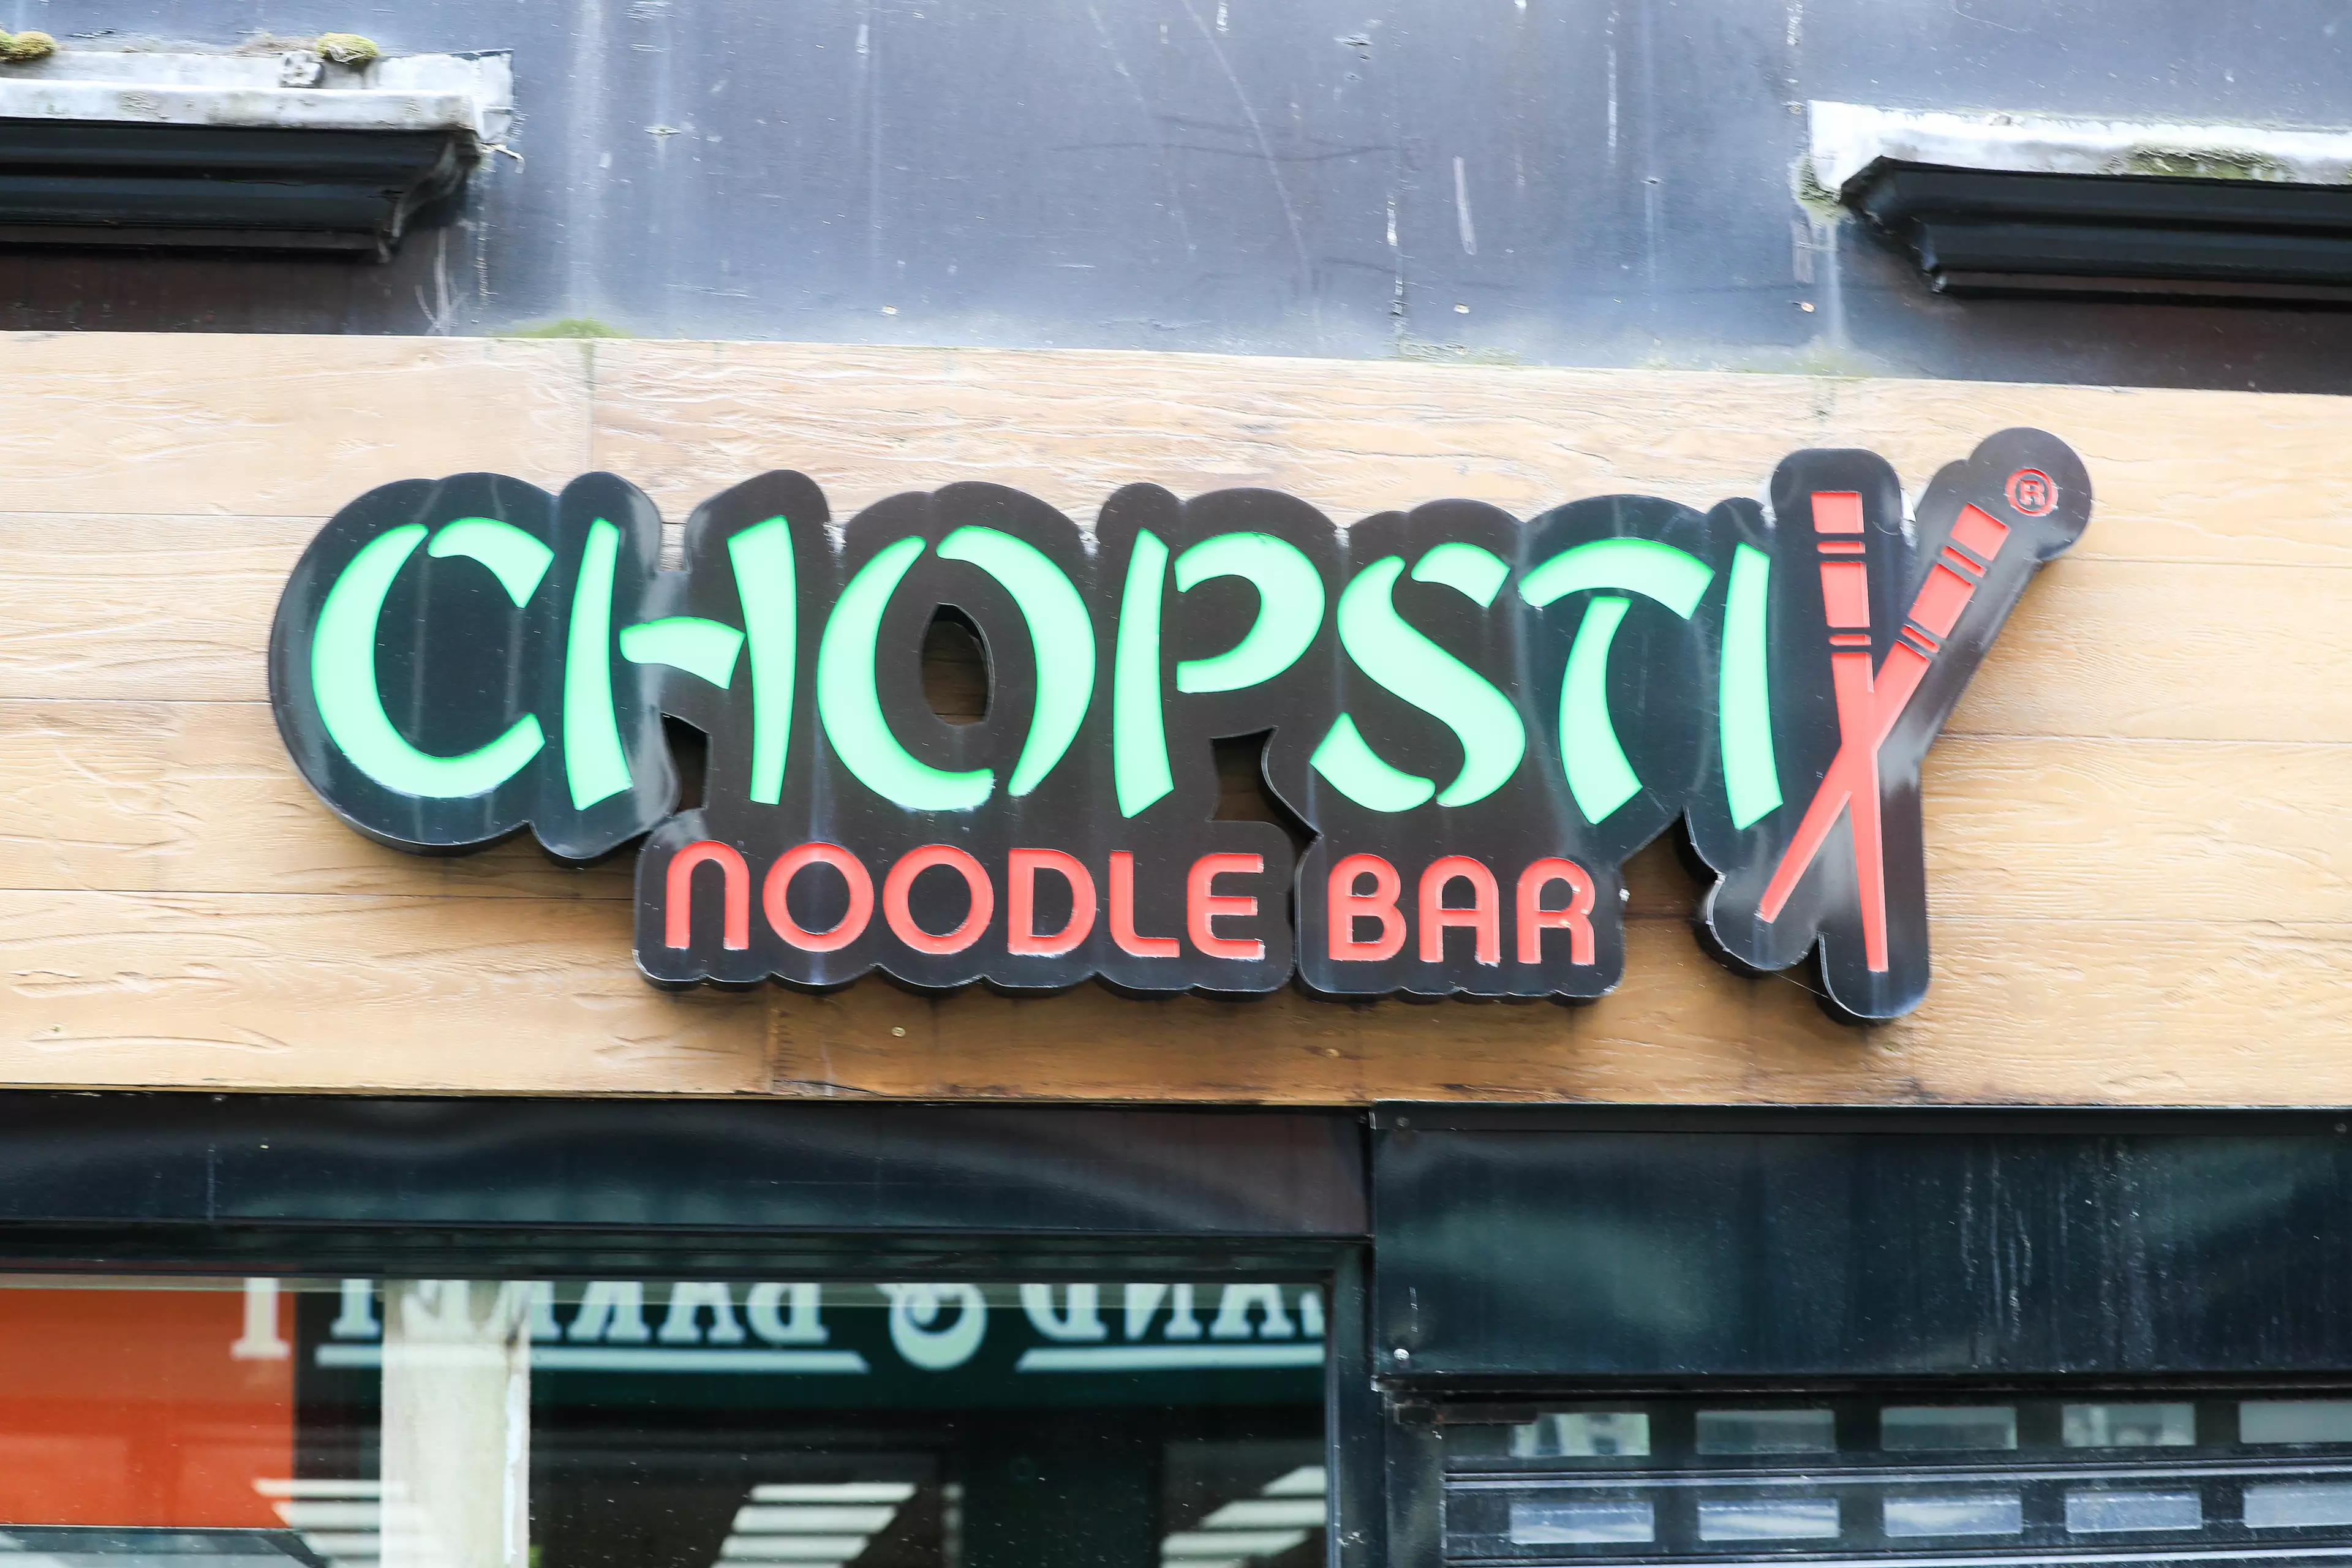 Chopstix is looking for a new staffer for the very special role (